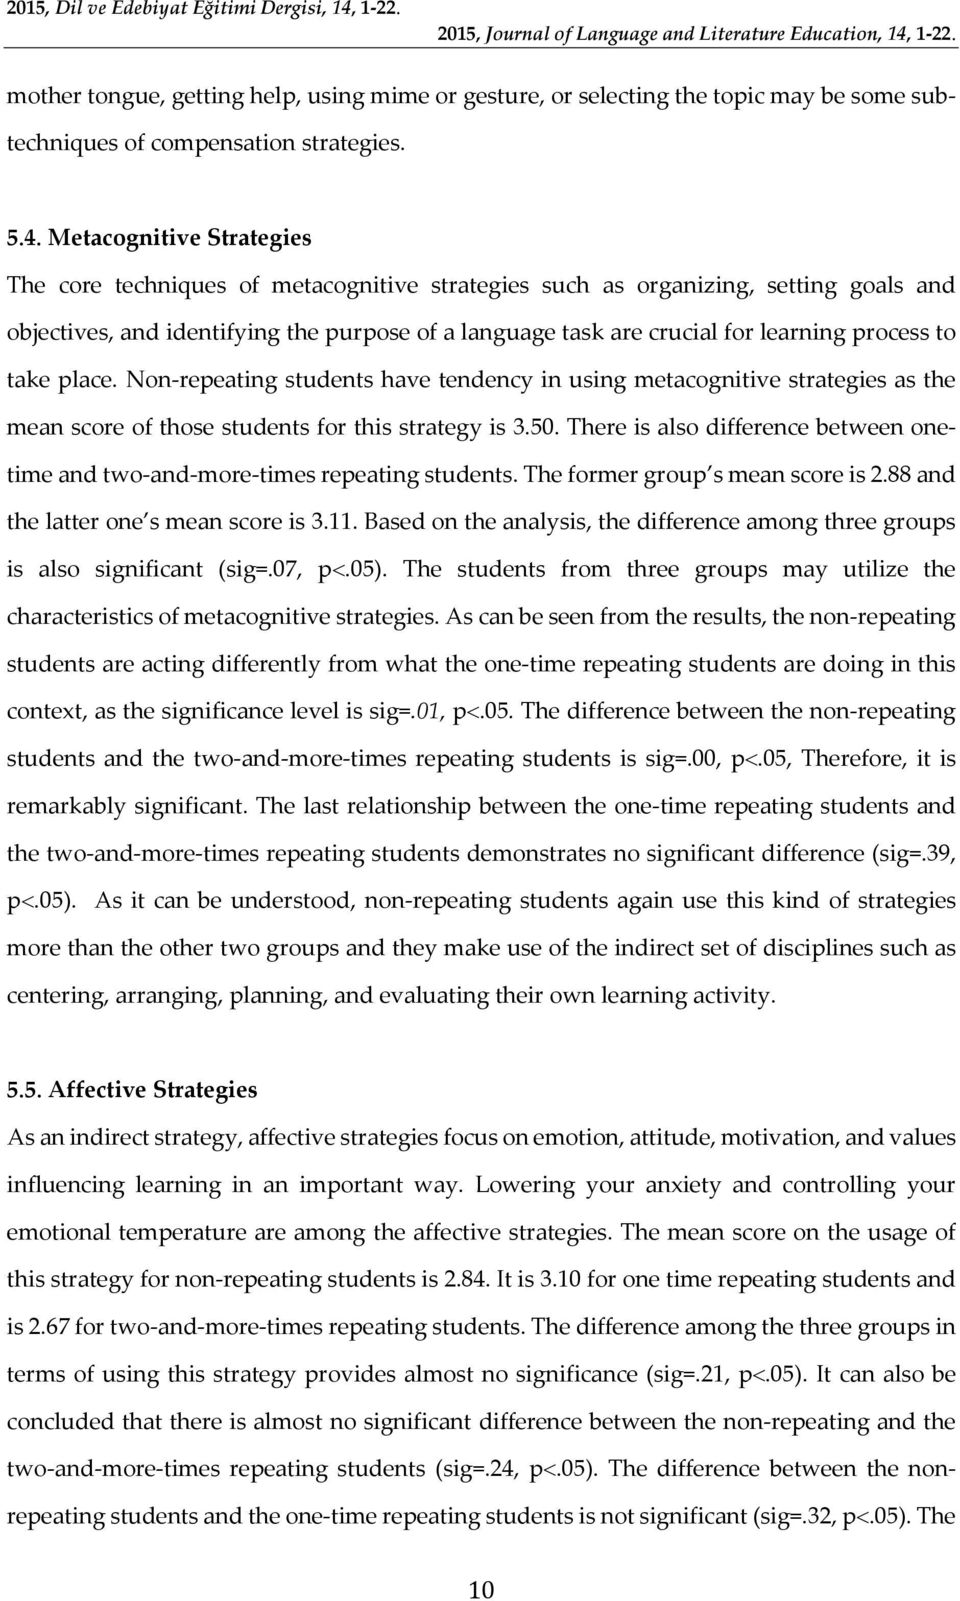 process to take place. Non-repeating students have tendency in using metacognitive strategies as the mean score of those students for this strategy is 3.50.